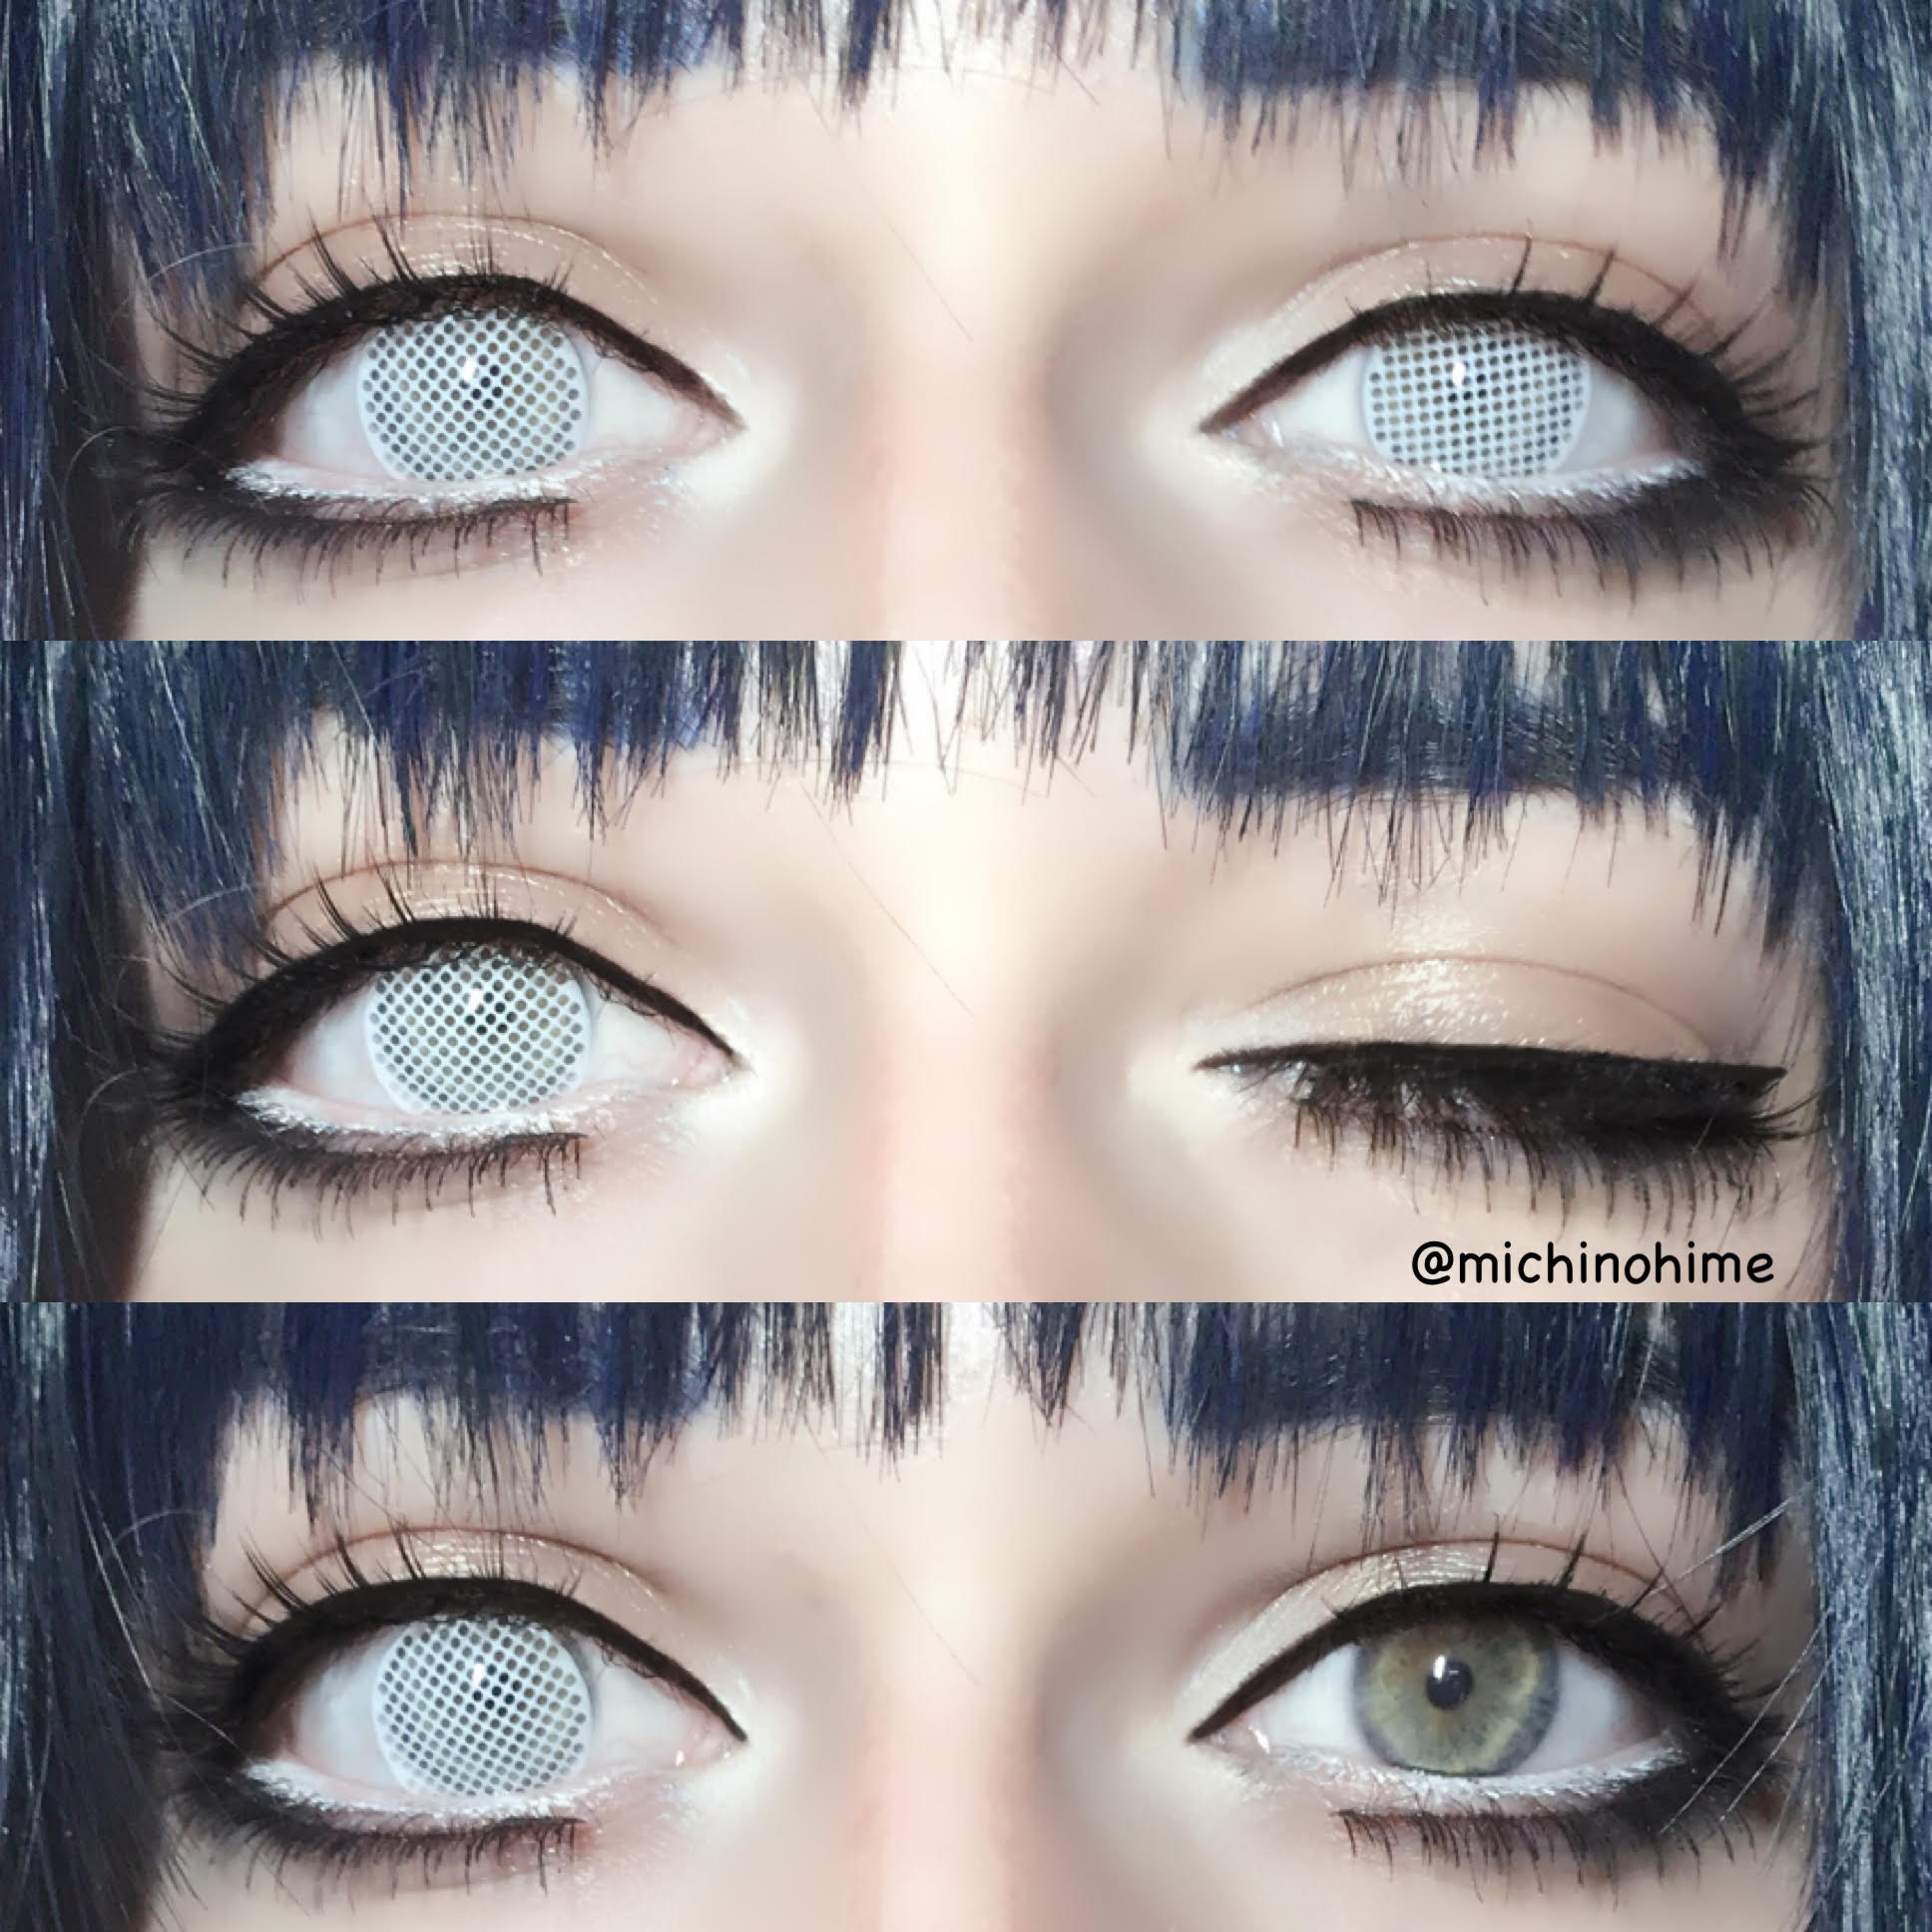 EOS mesh contacts collage